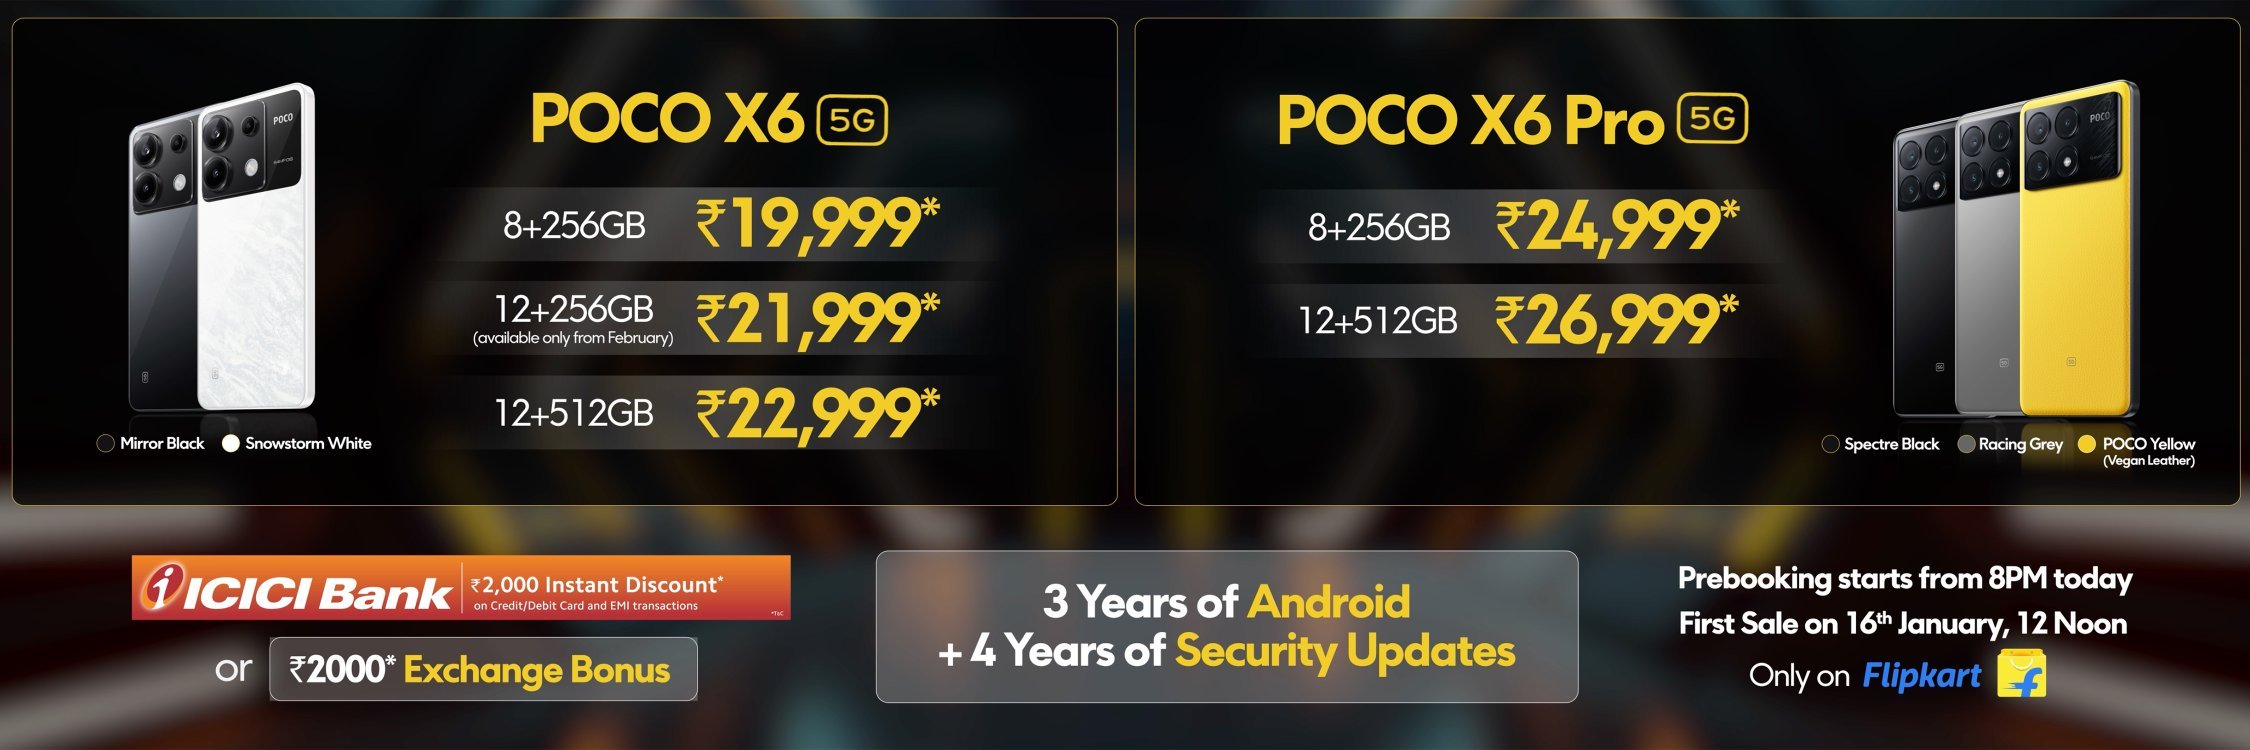 POCO X6 PRO And POCO X6 FEATURES: Launch Date And Price In India -  ExpressBlogsHub